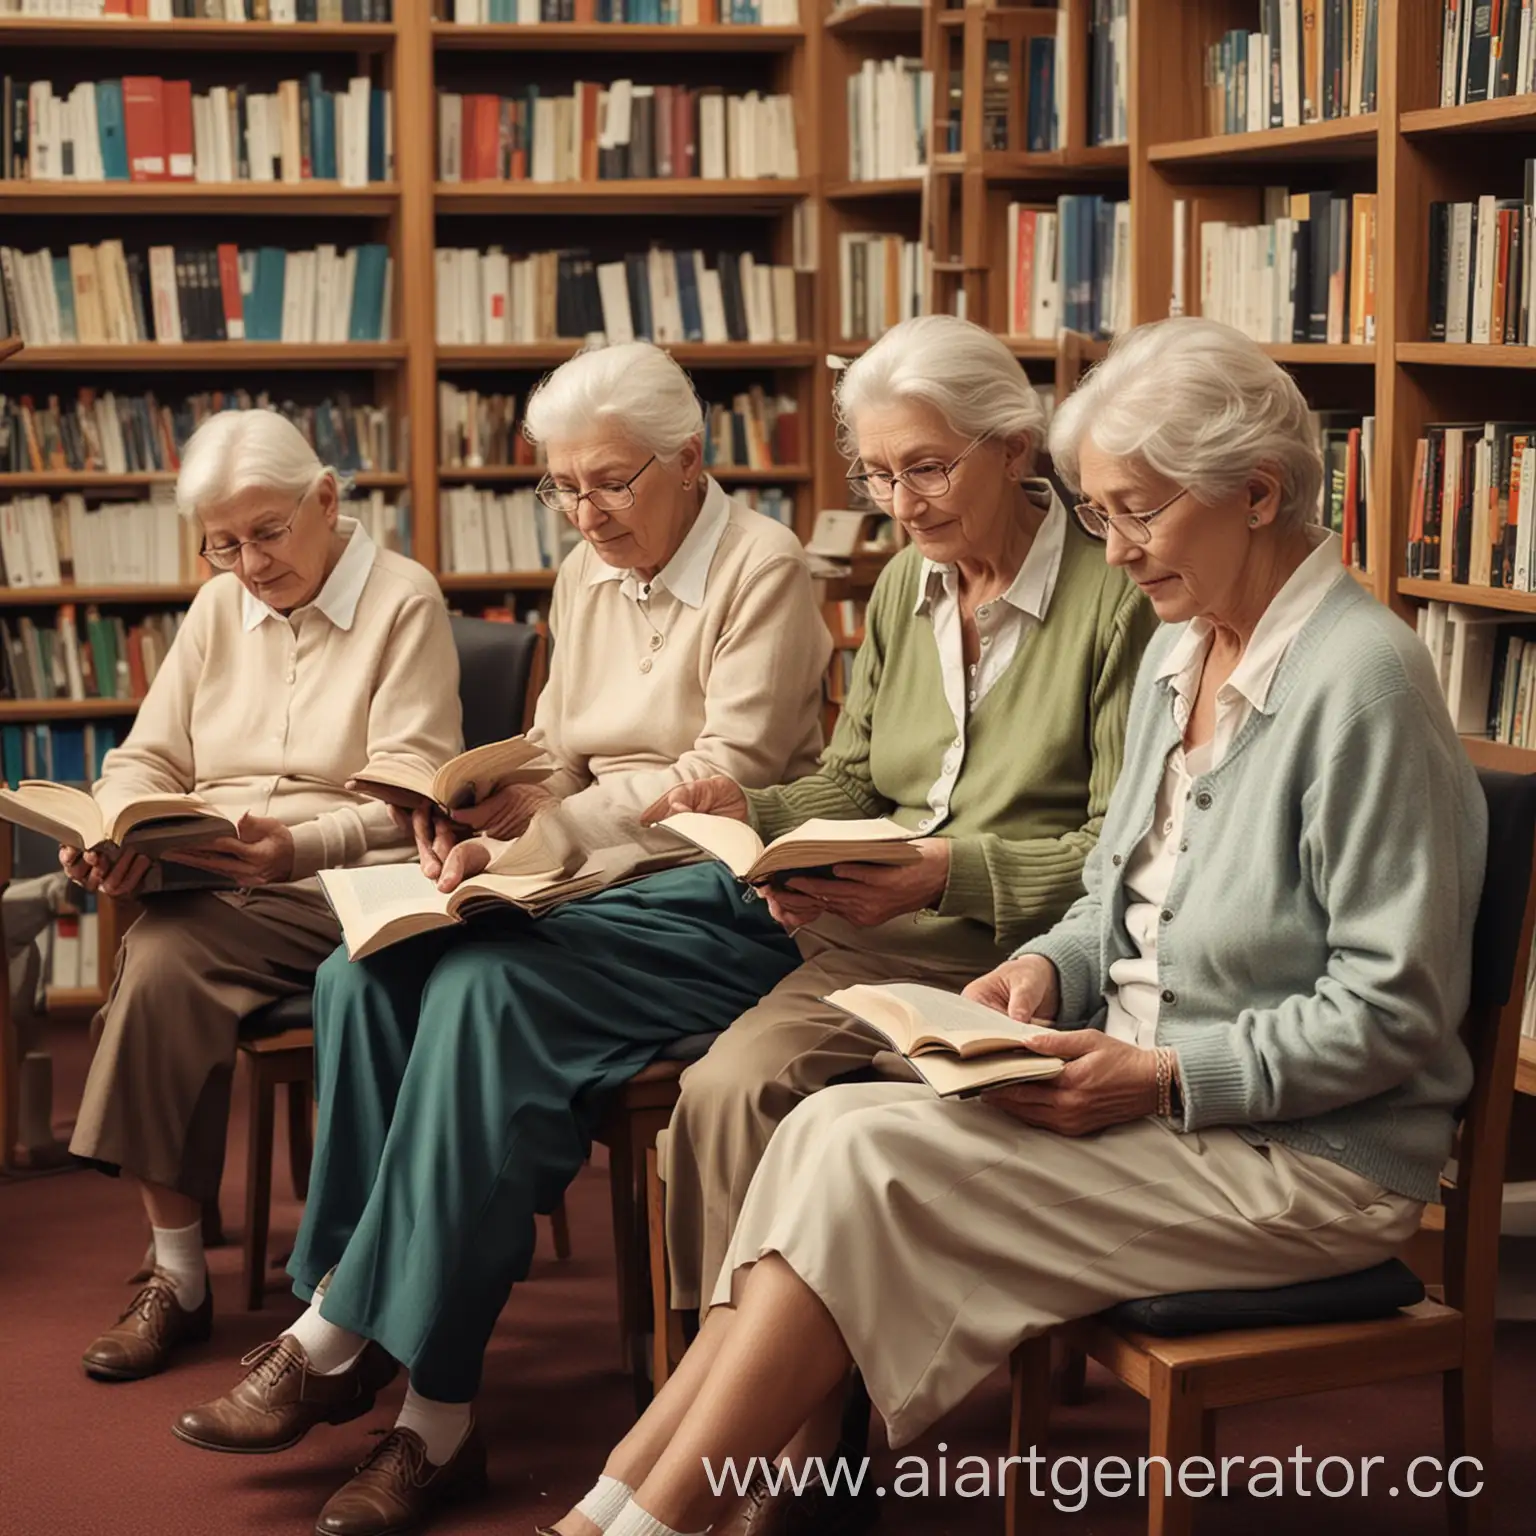 Elderly-Book-Club-Reading-and-Socializing-in-Cozy-Library-Setting